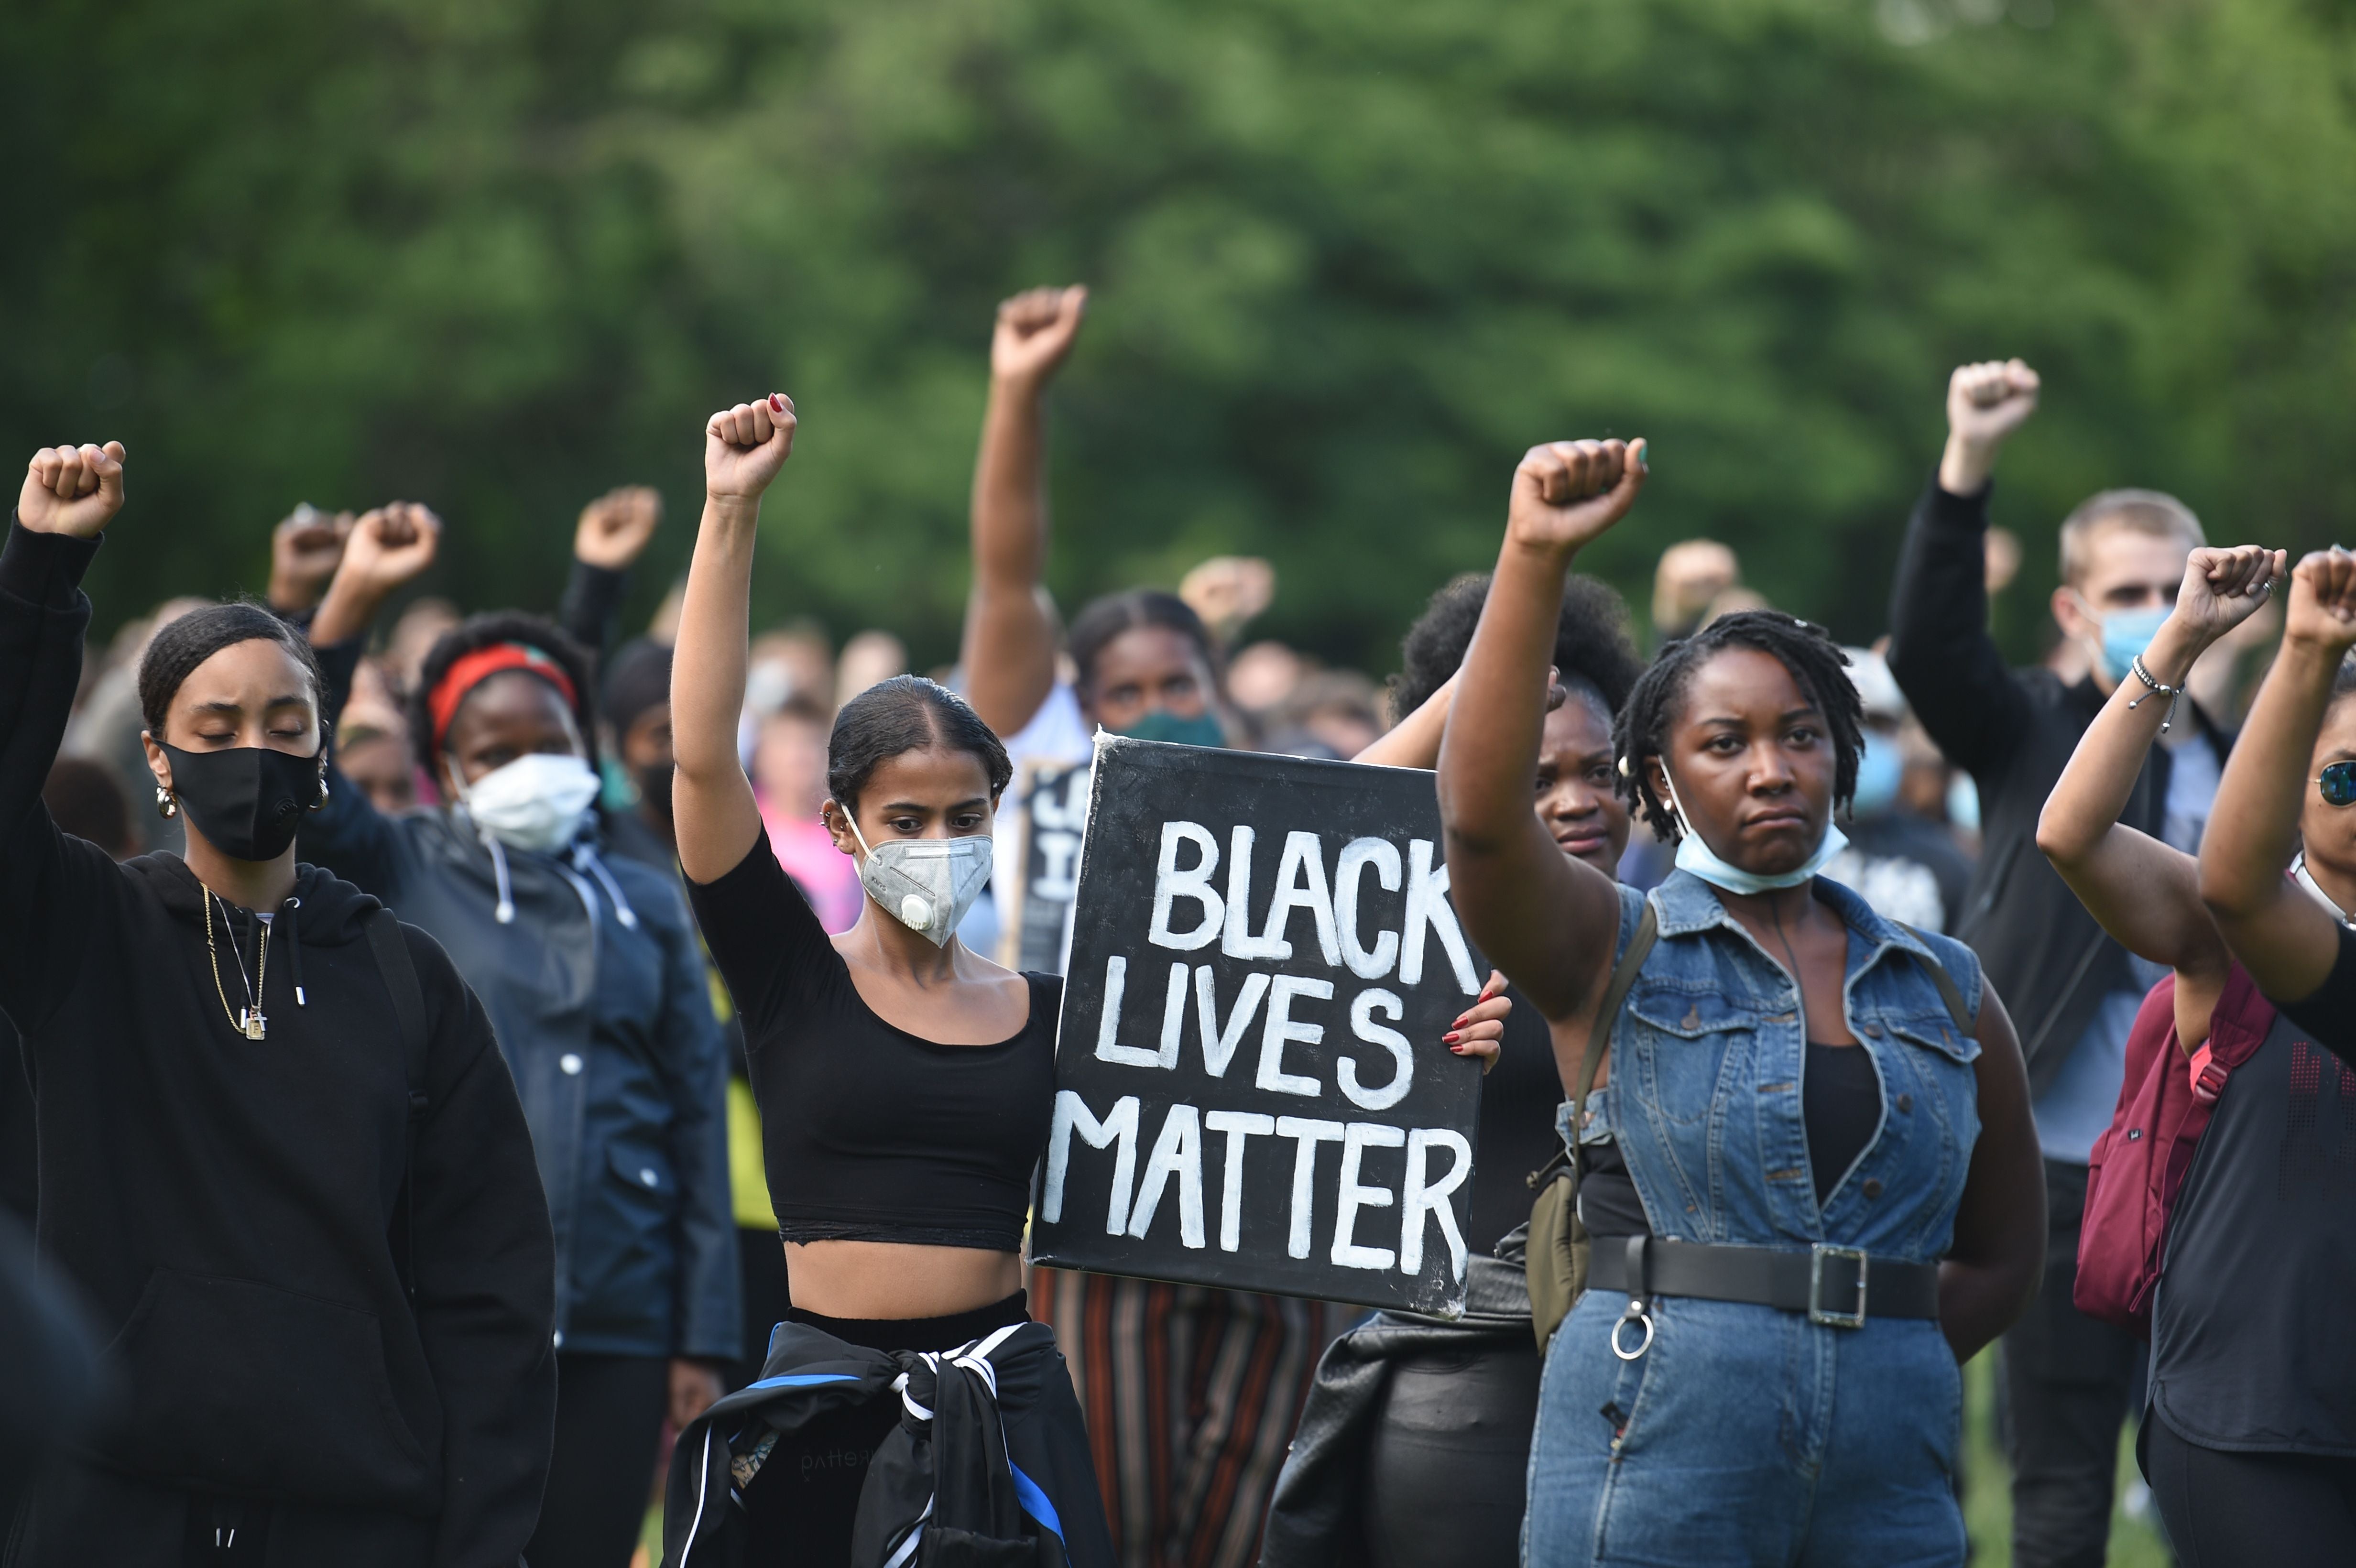 The Black Lives Matter movement has provided a &nbsp;global platform that needs to be built upon